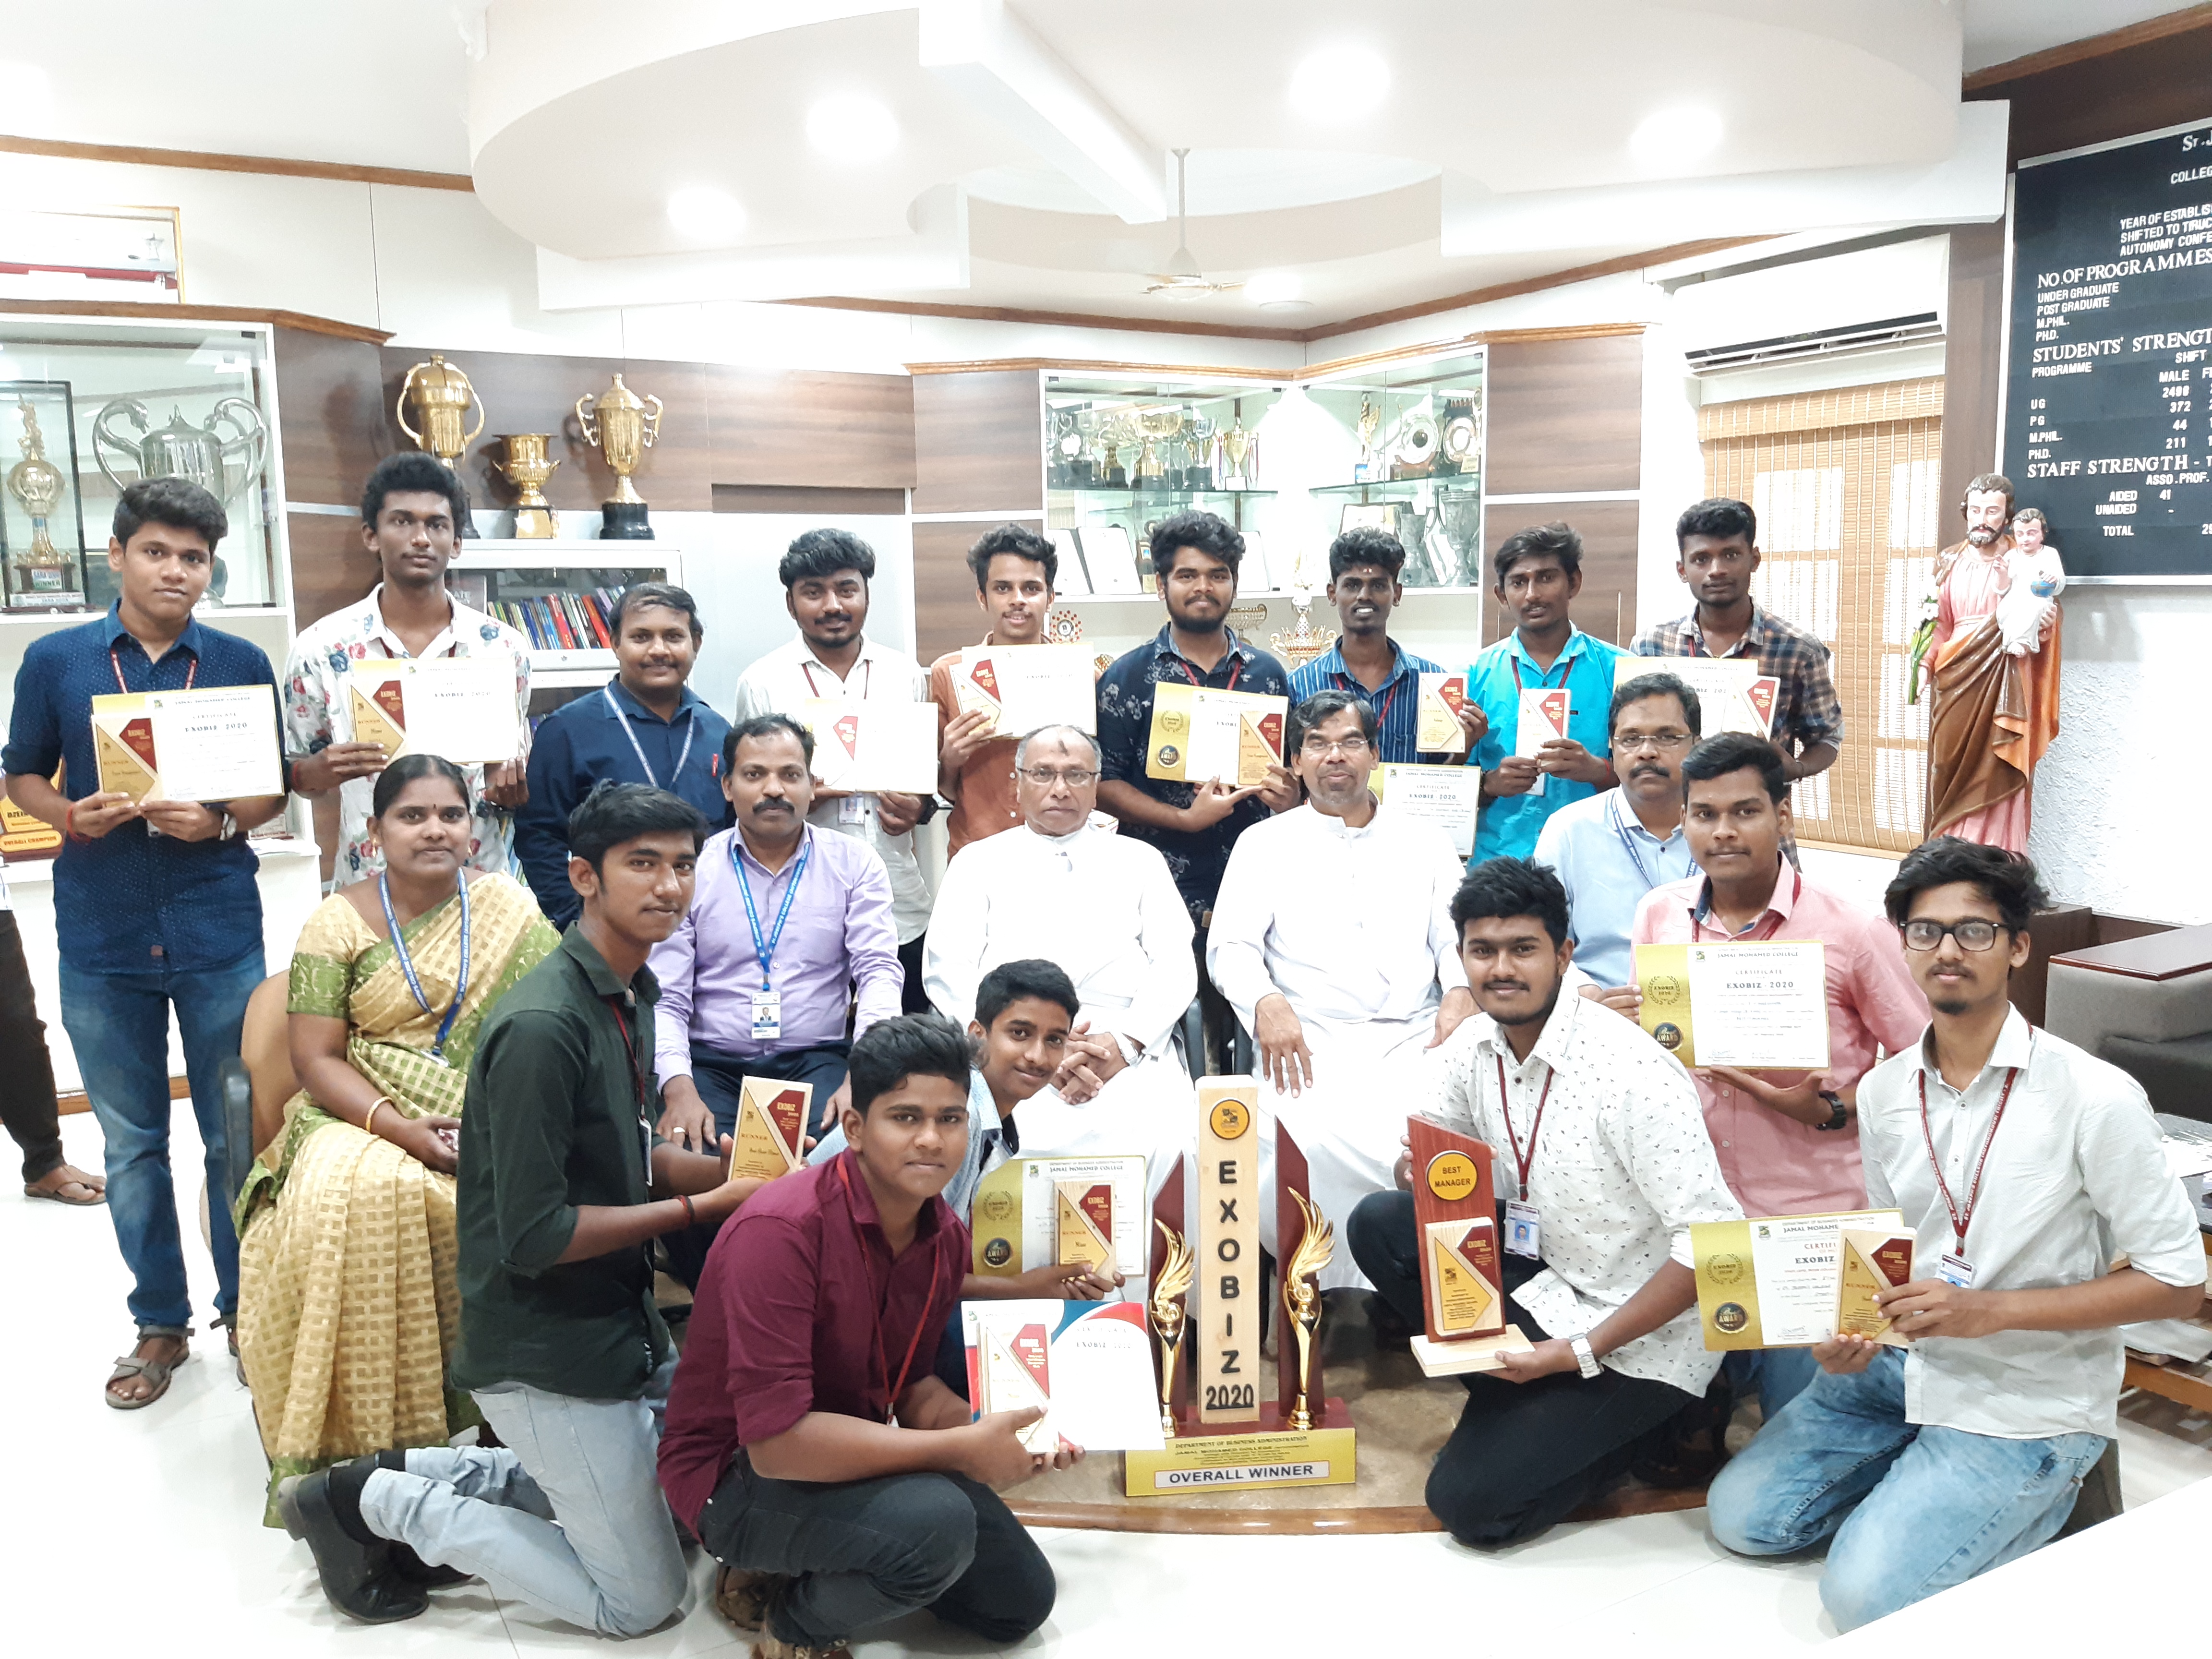 Dept. of Commerce (shift-II) Students won overall winners in the event of